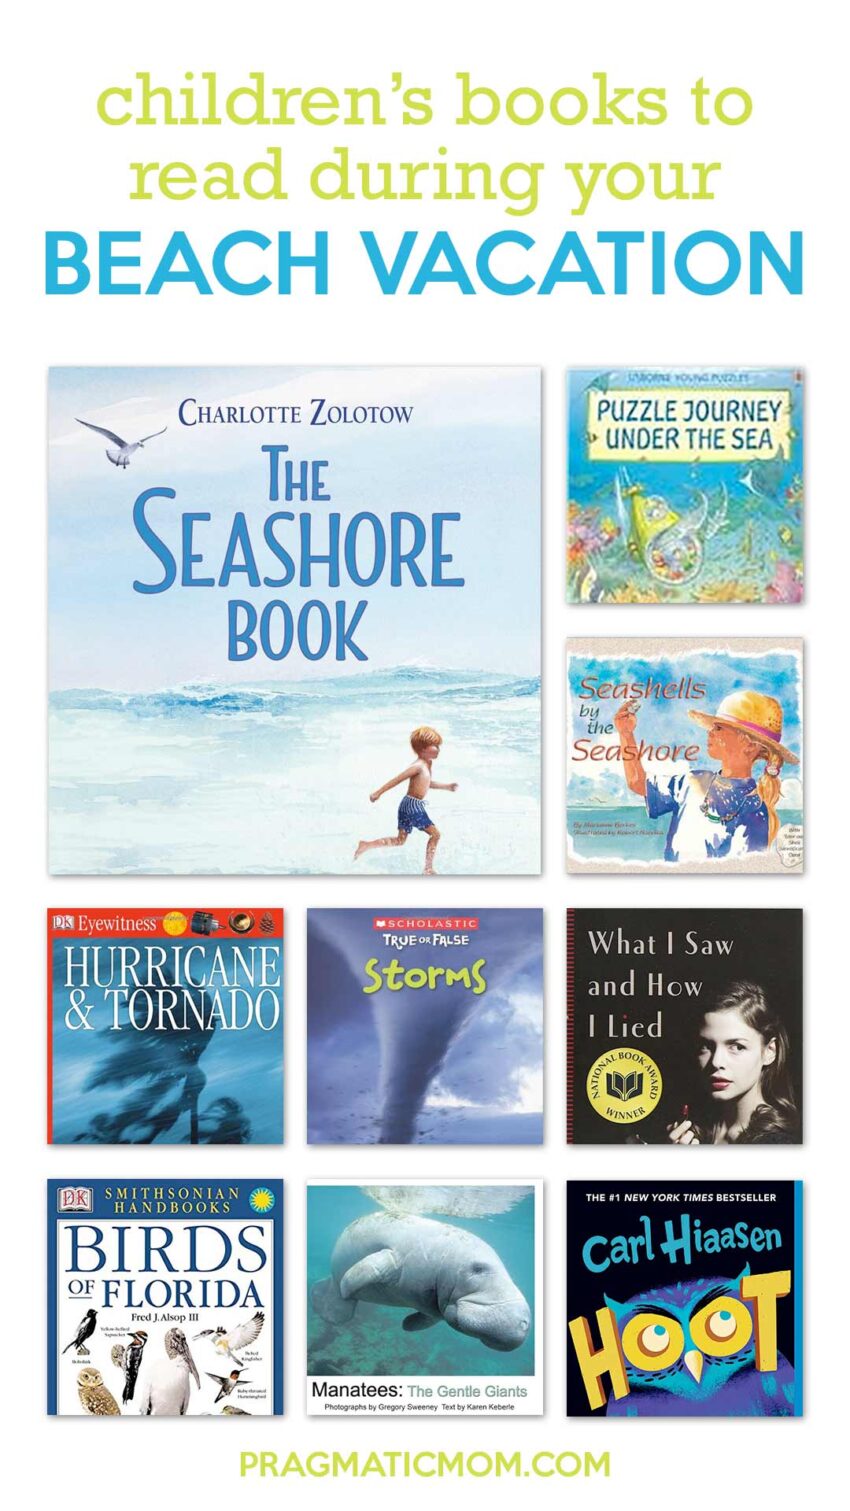 Books for Kids for Beach Vacation